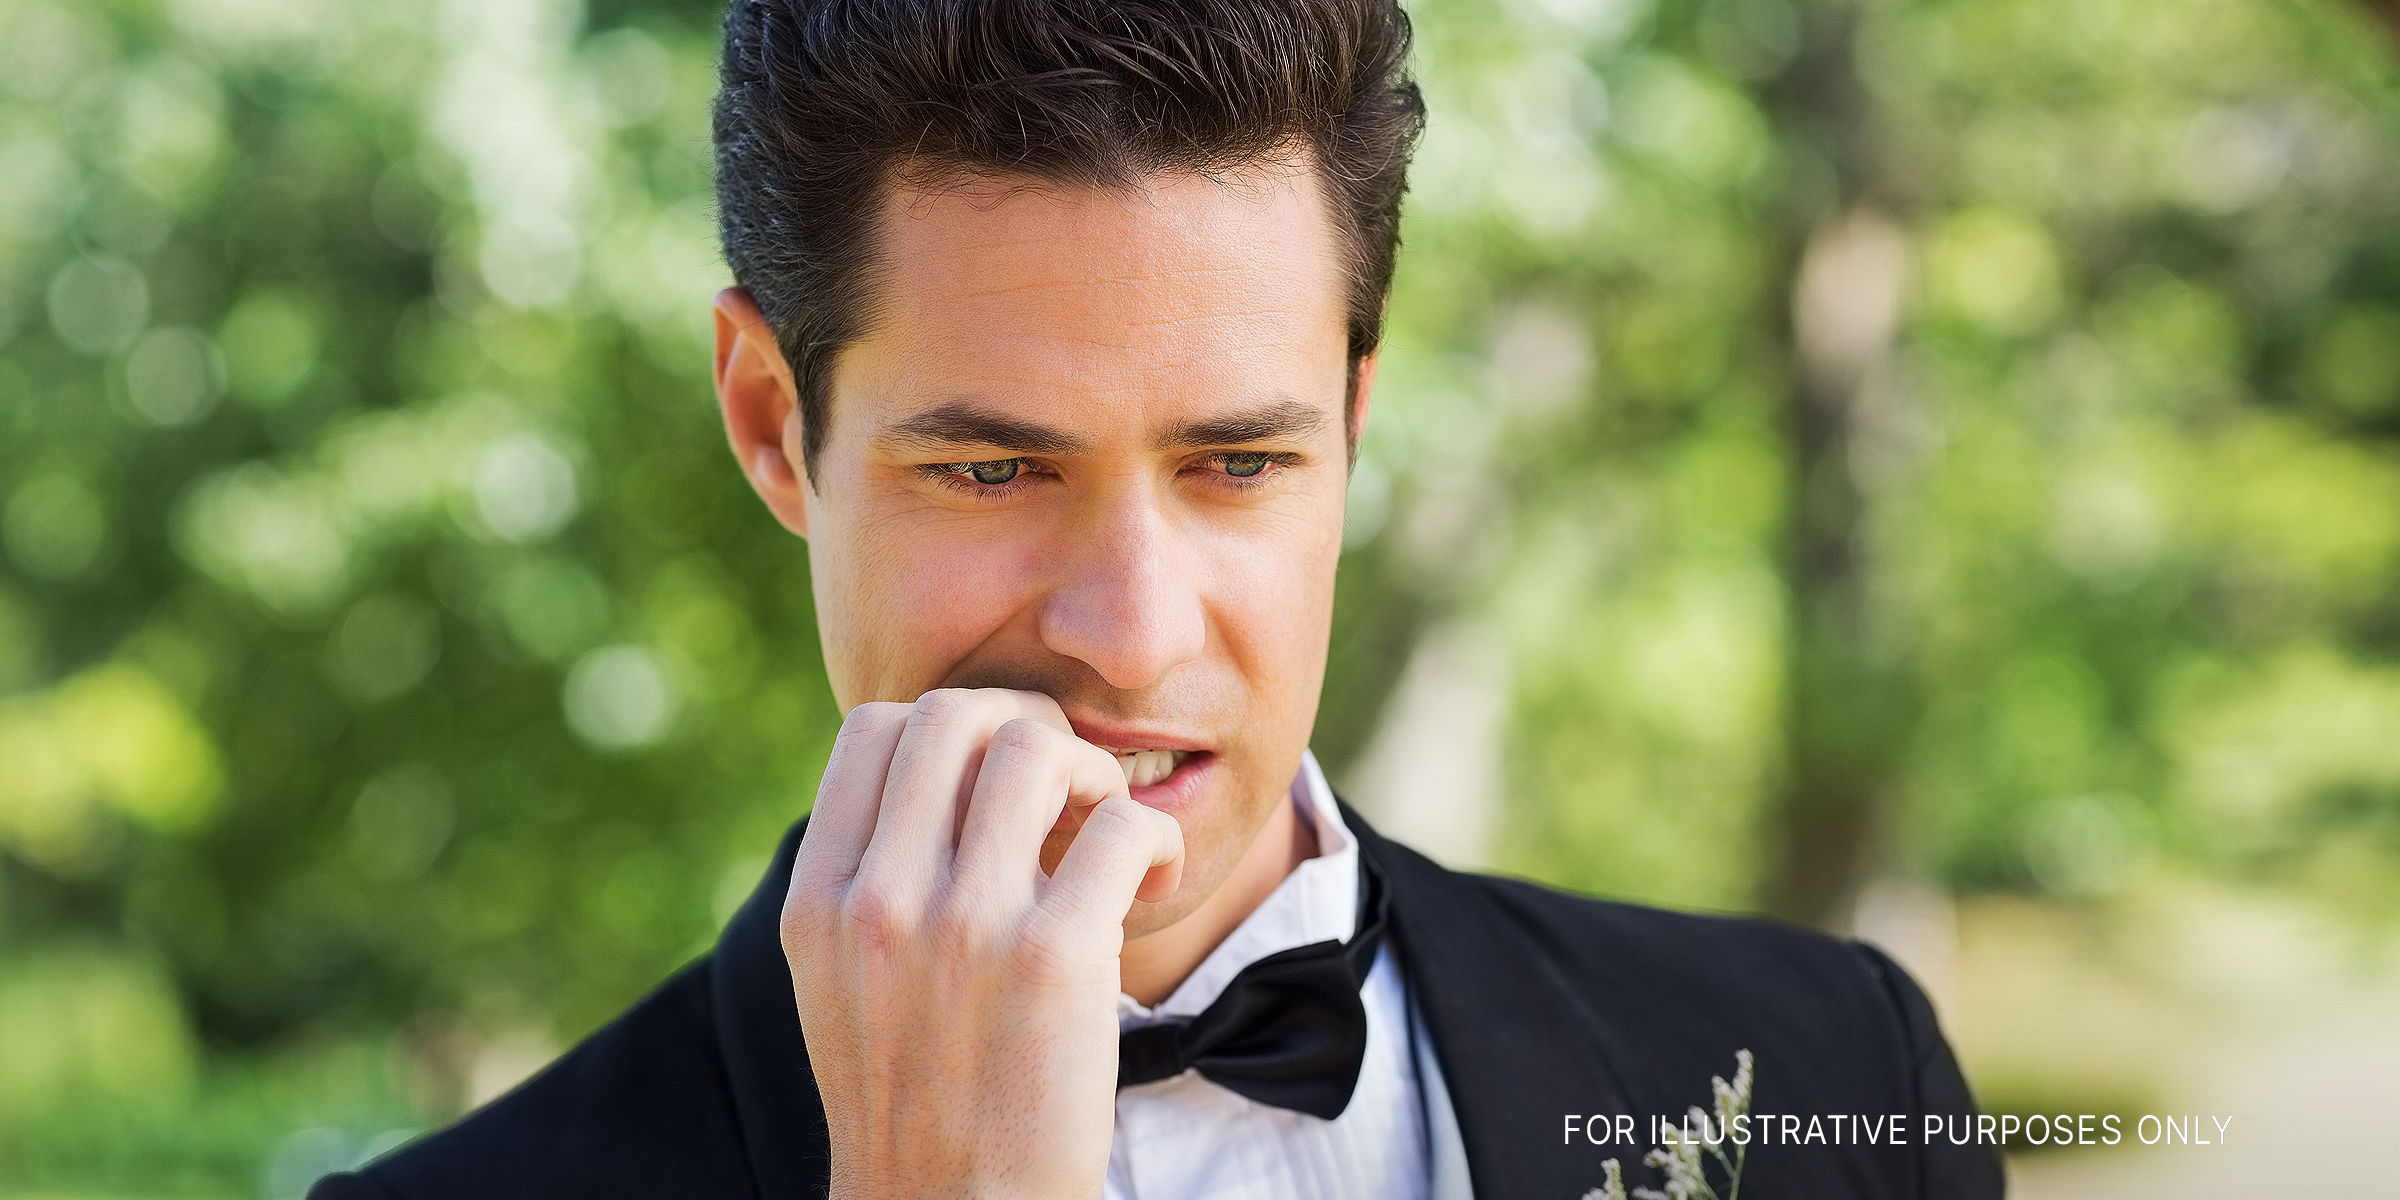 A nervous groom | Source: Getty Images